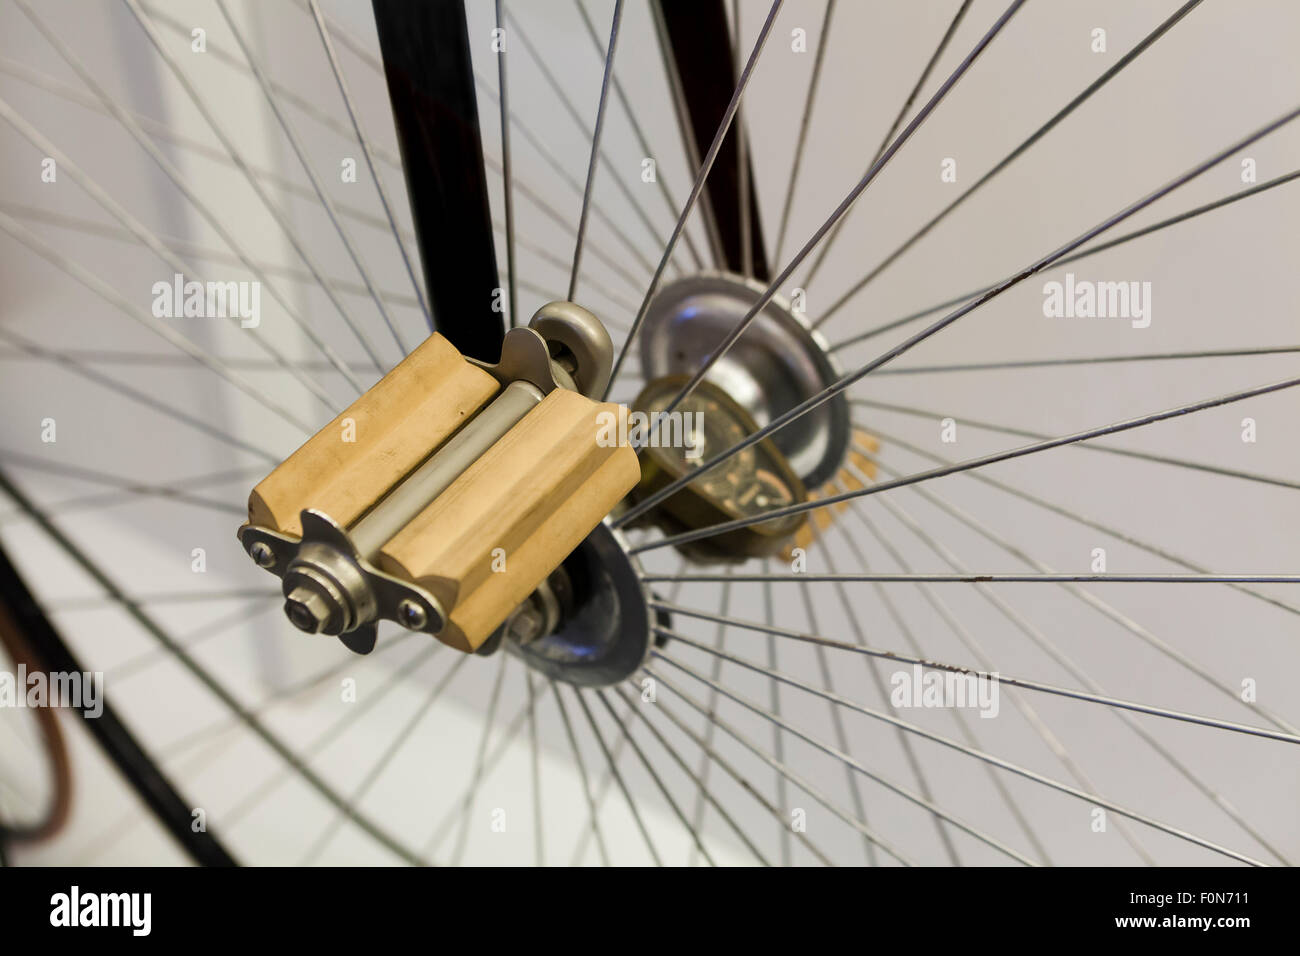 High-wheel, aka Penny-farthing, bicycle pedals - USA Stock Photo